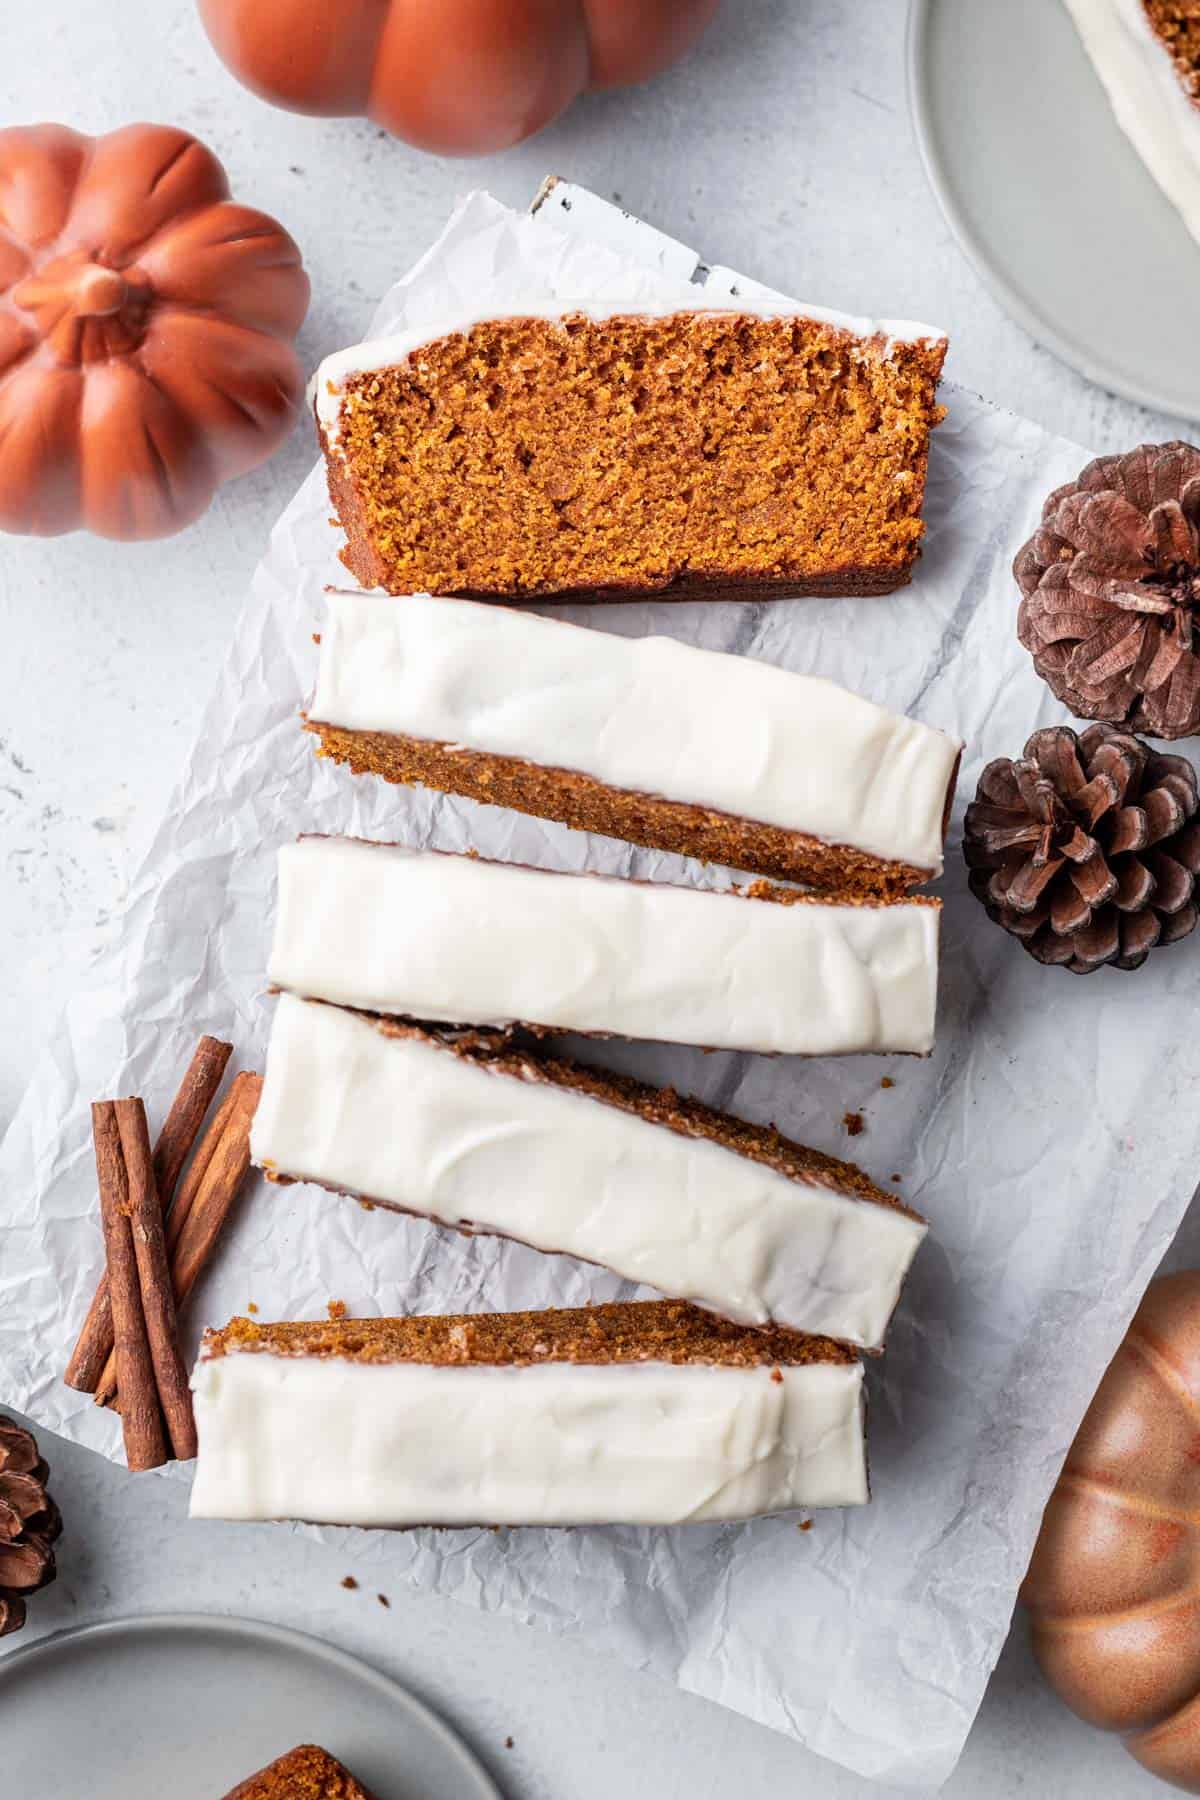 Pumpkin bread with cream cheese frosting sliced into pieces for serving.